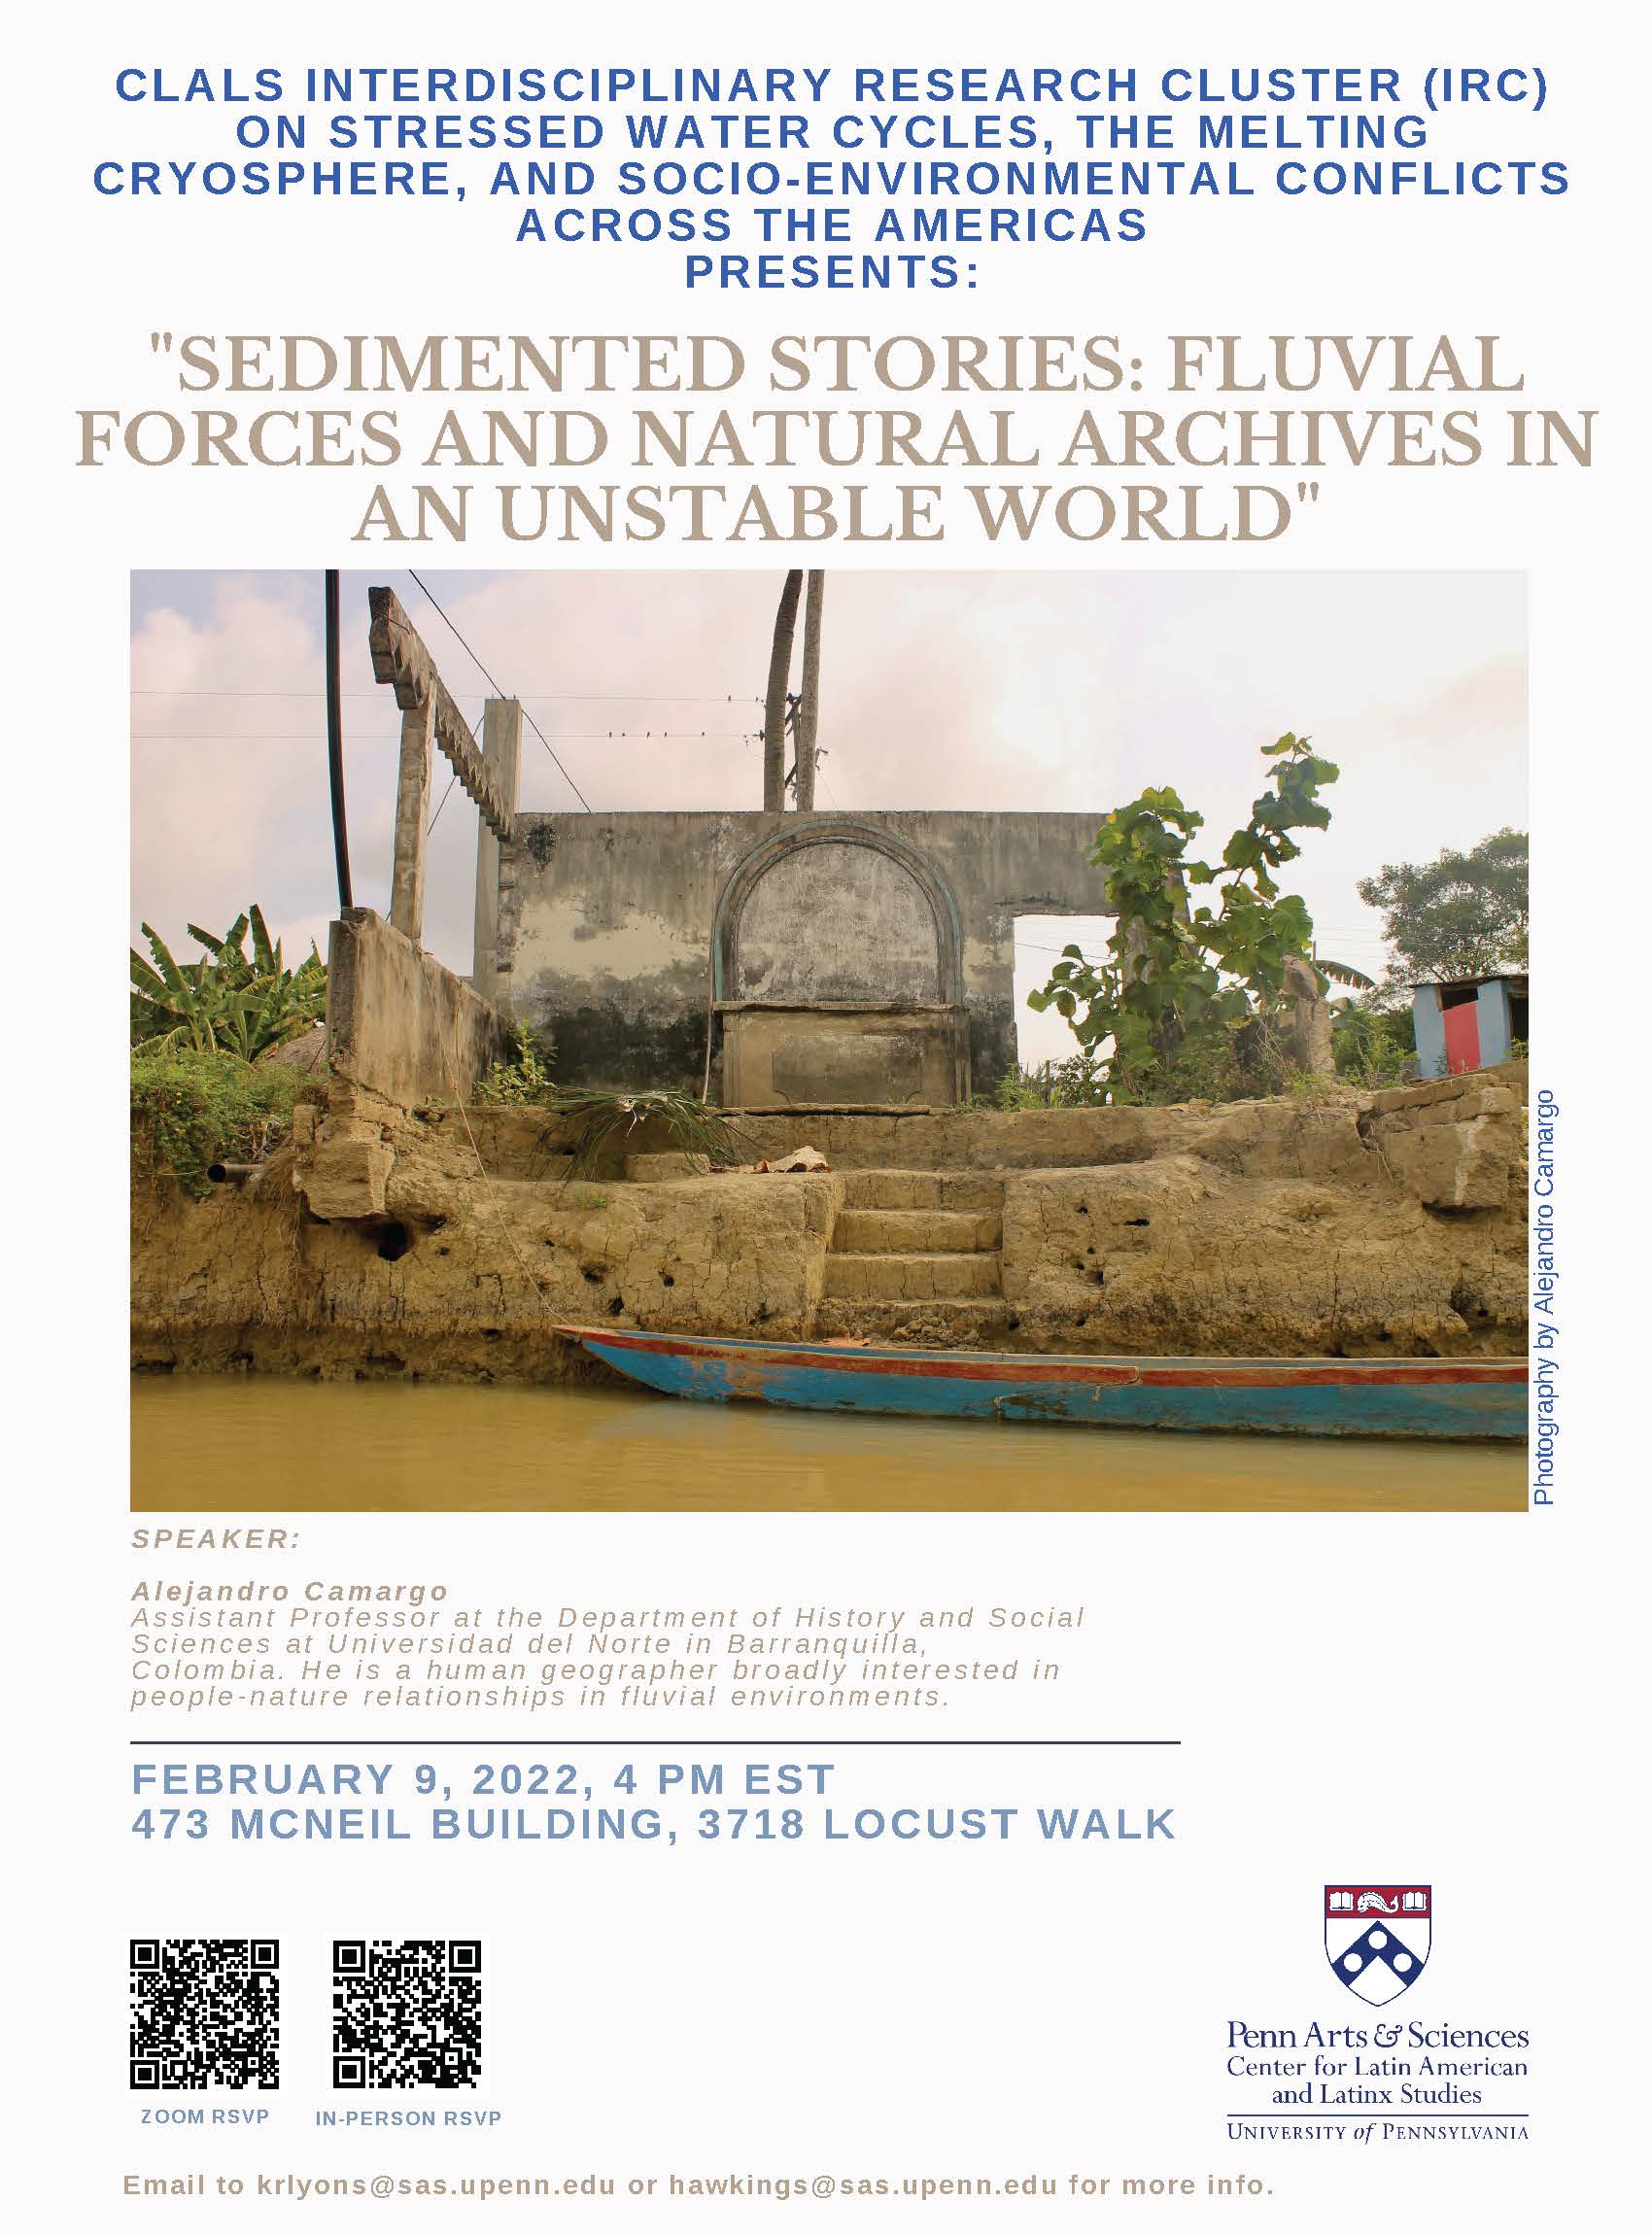 "Sedimented stories: Fluvial forces and natural archives in an unstable world" with Alejandro Camargo